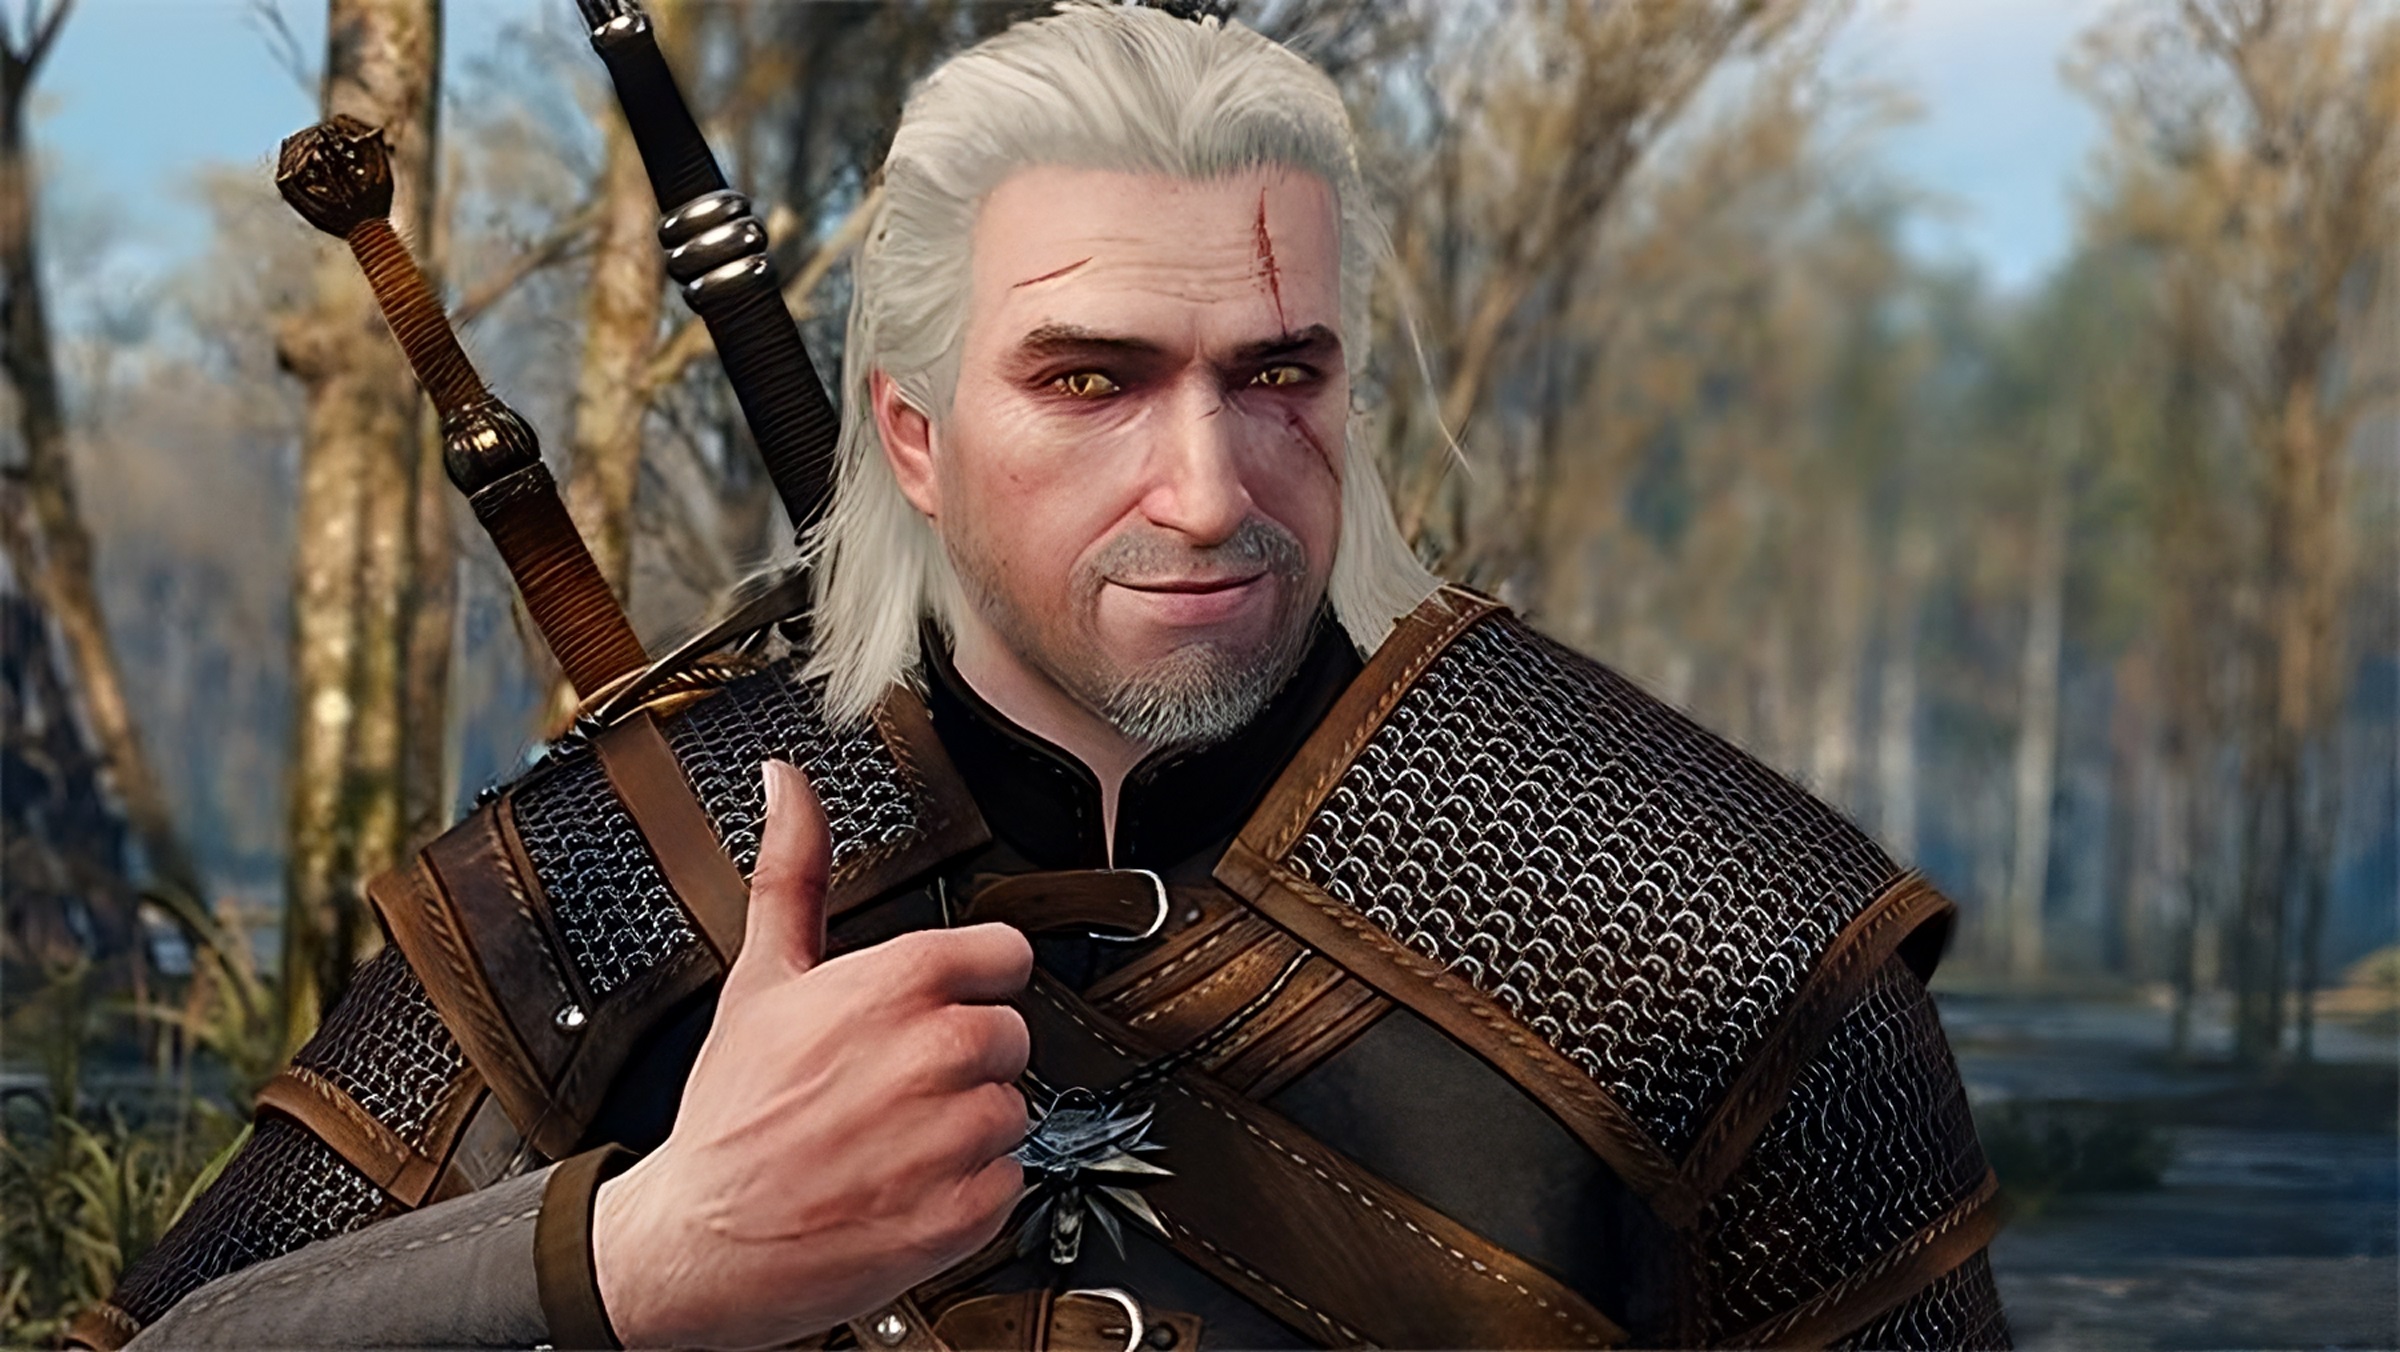 9 years on, one dedicated Witcher 3 YouTuber is still finding new secrets and easter eggs in CD Projekt’s masterpiece